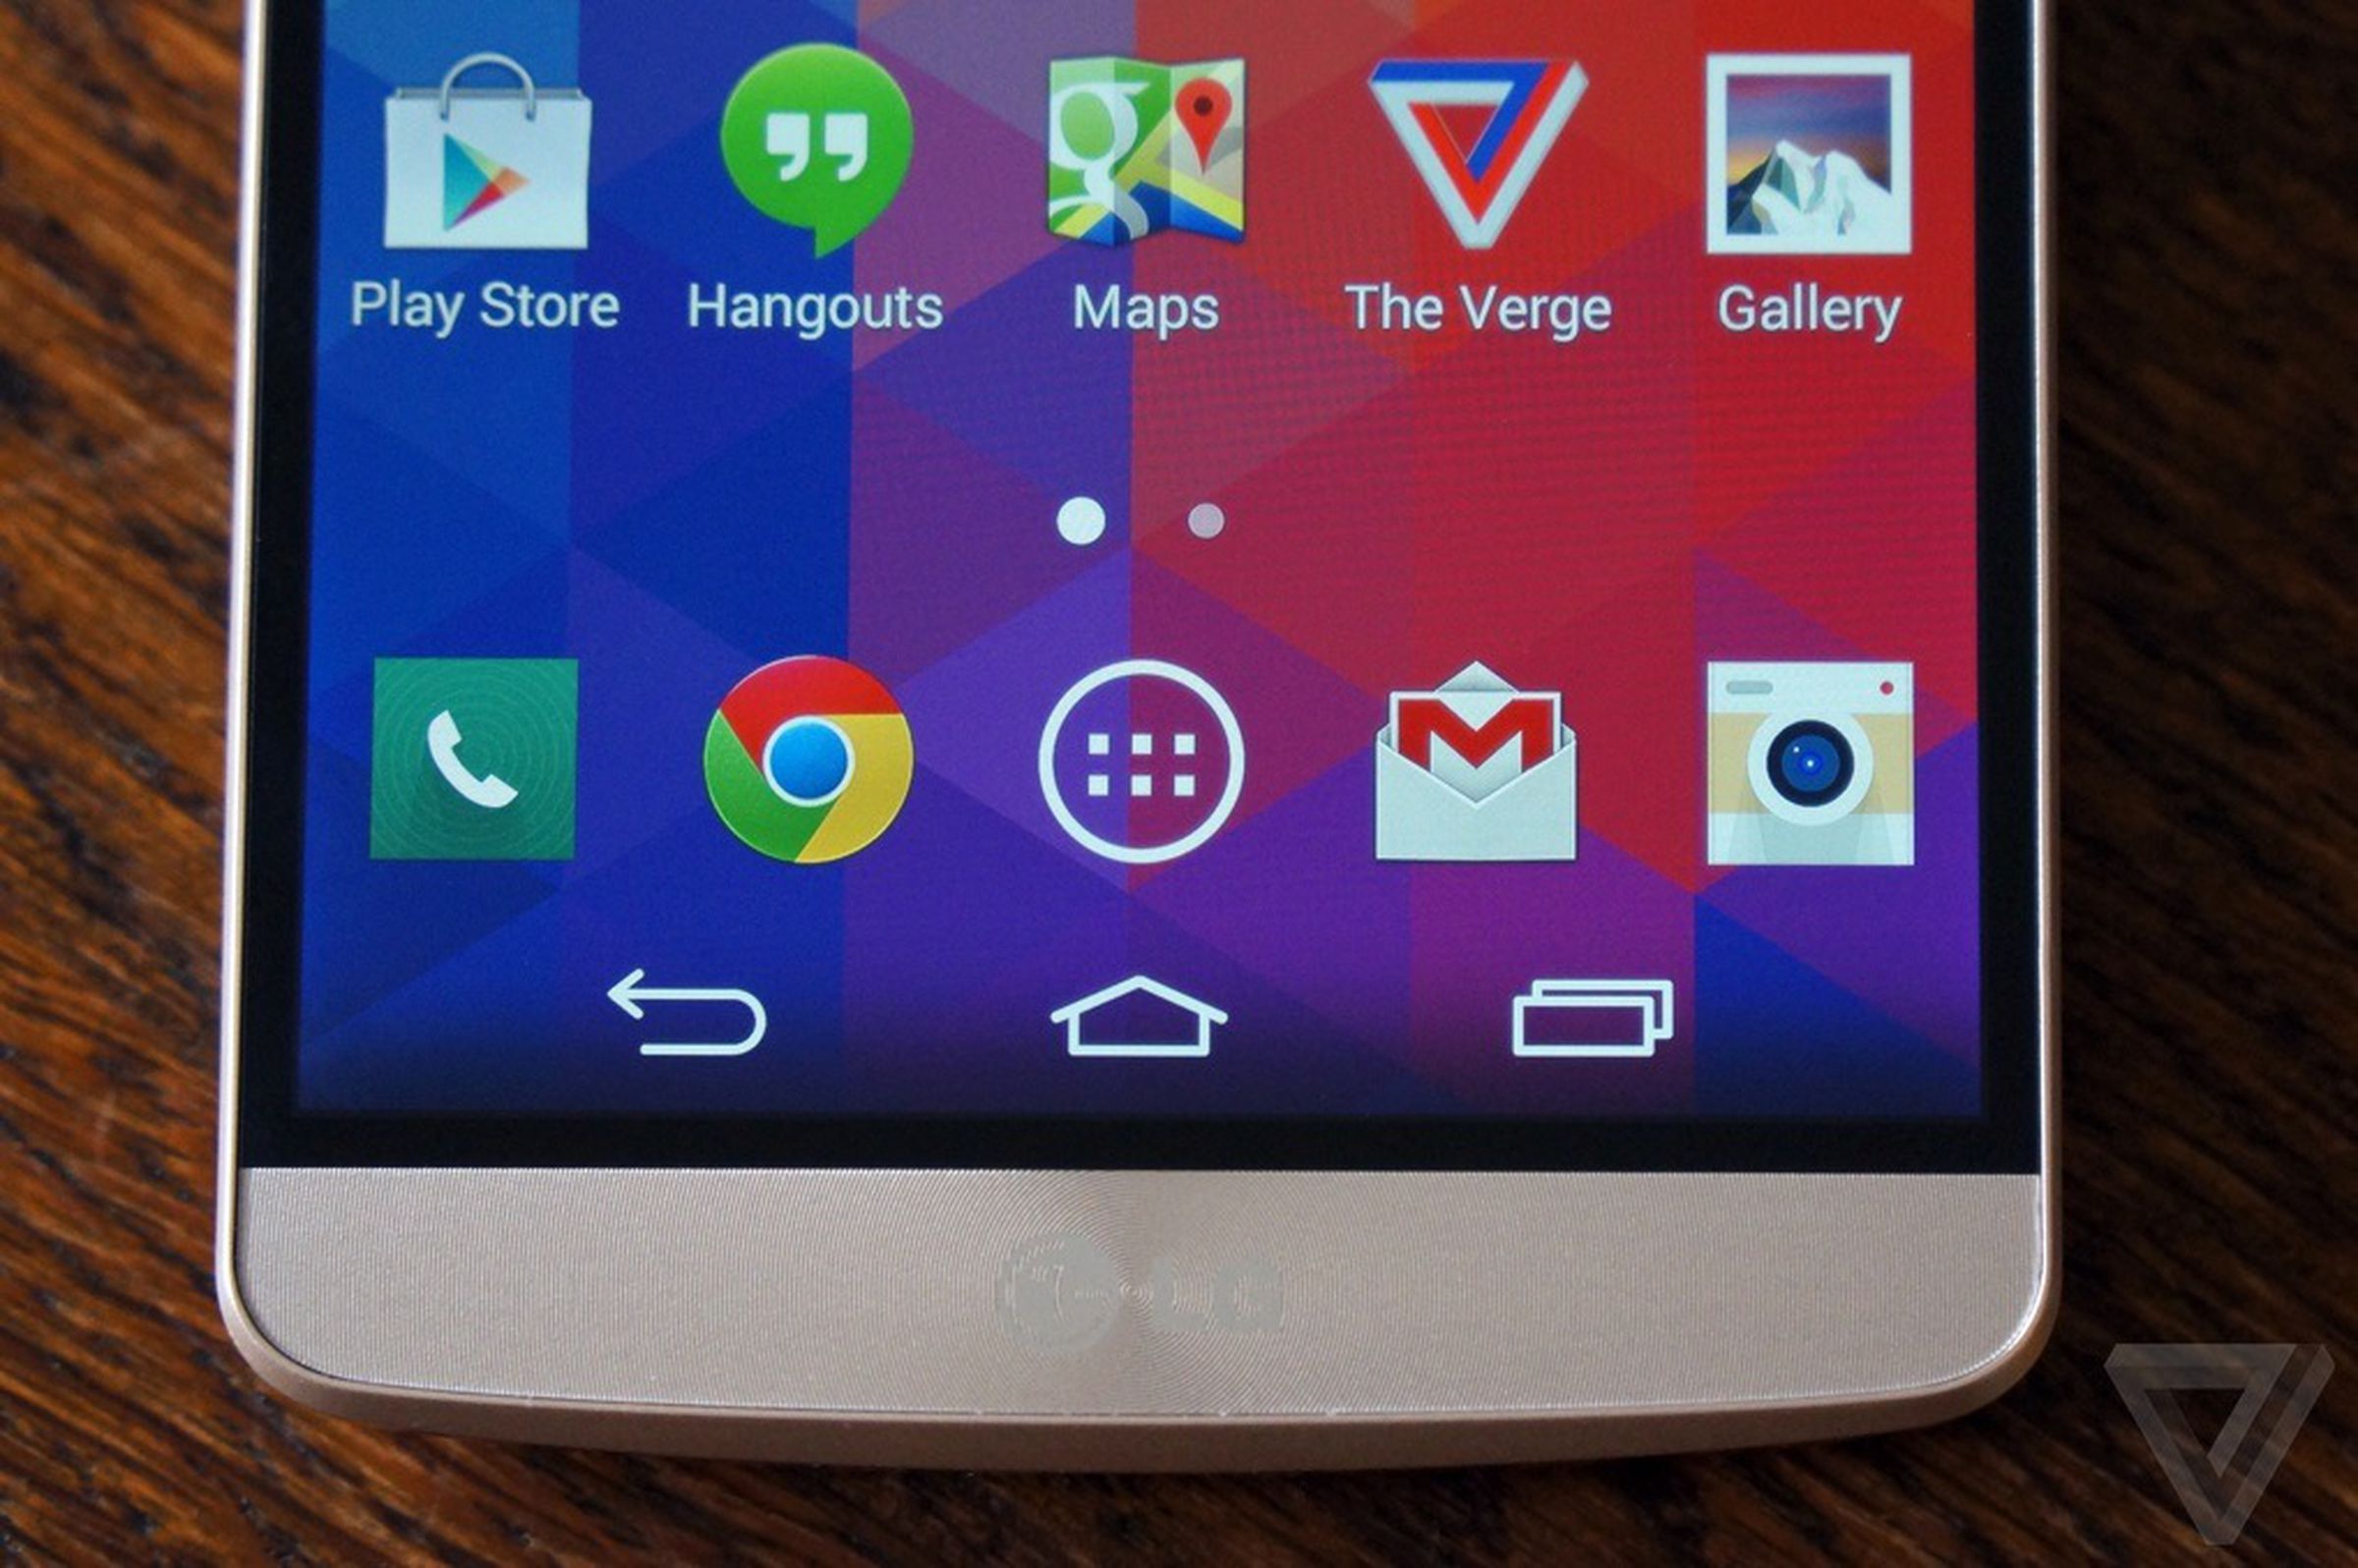 LG G3 hands-on gallery